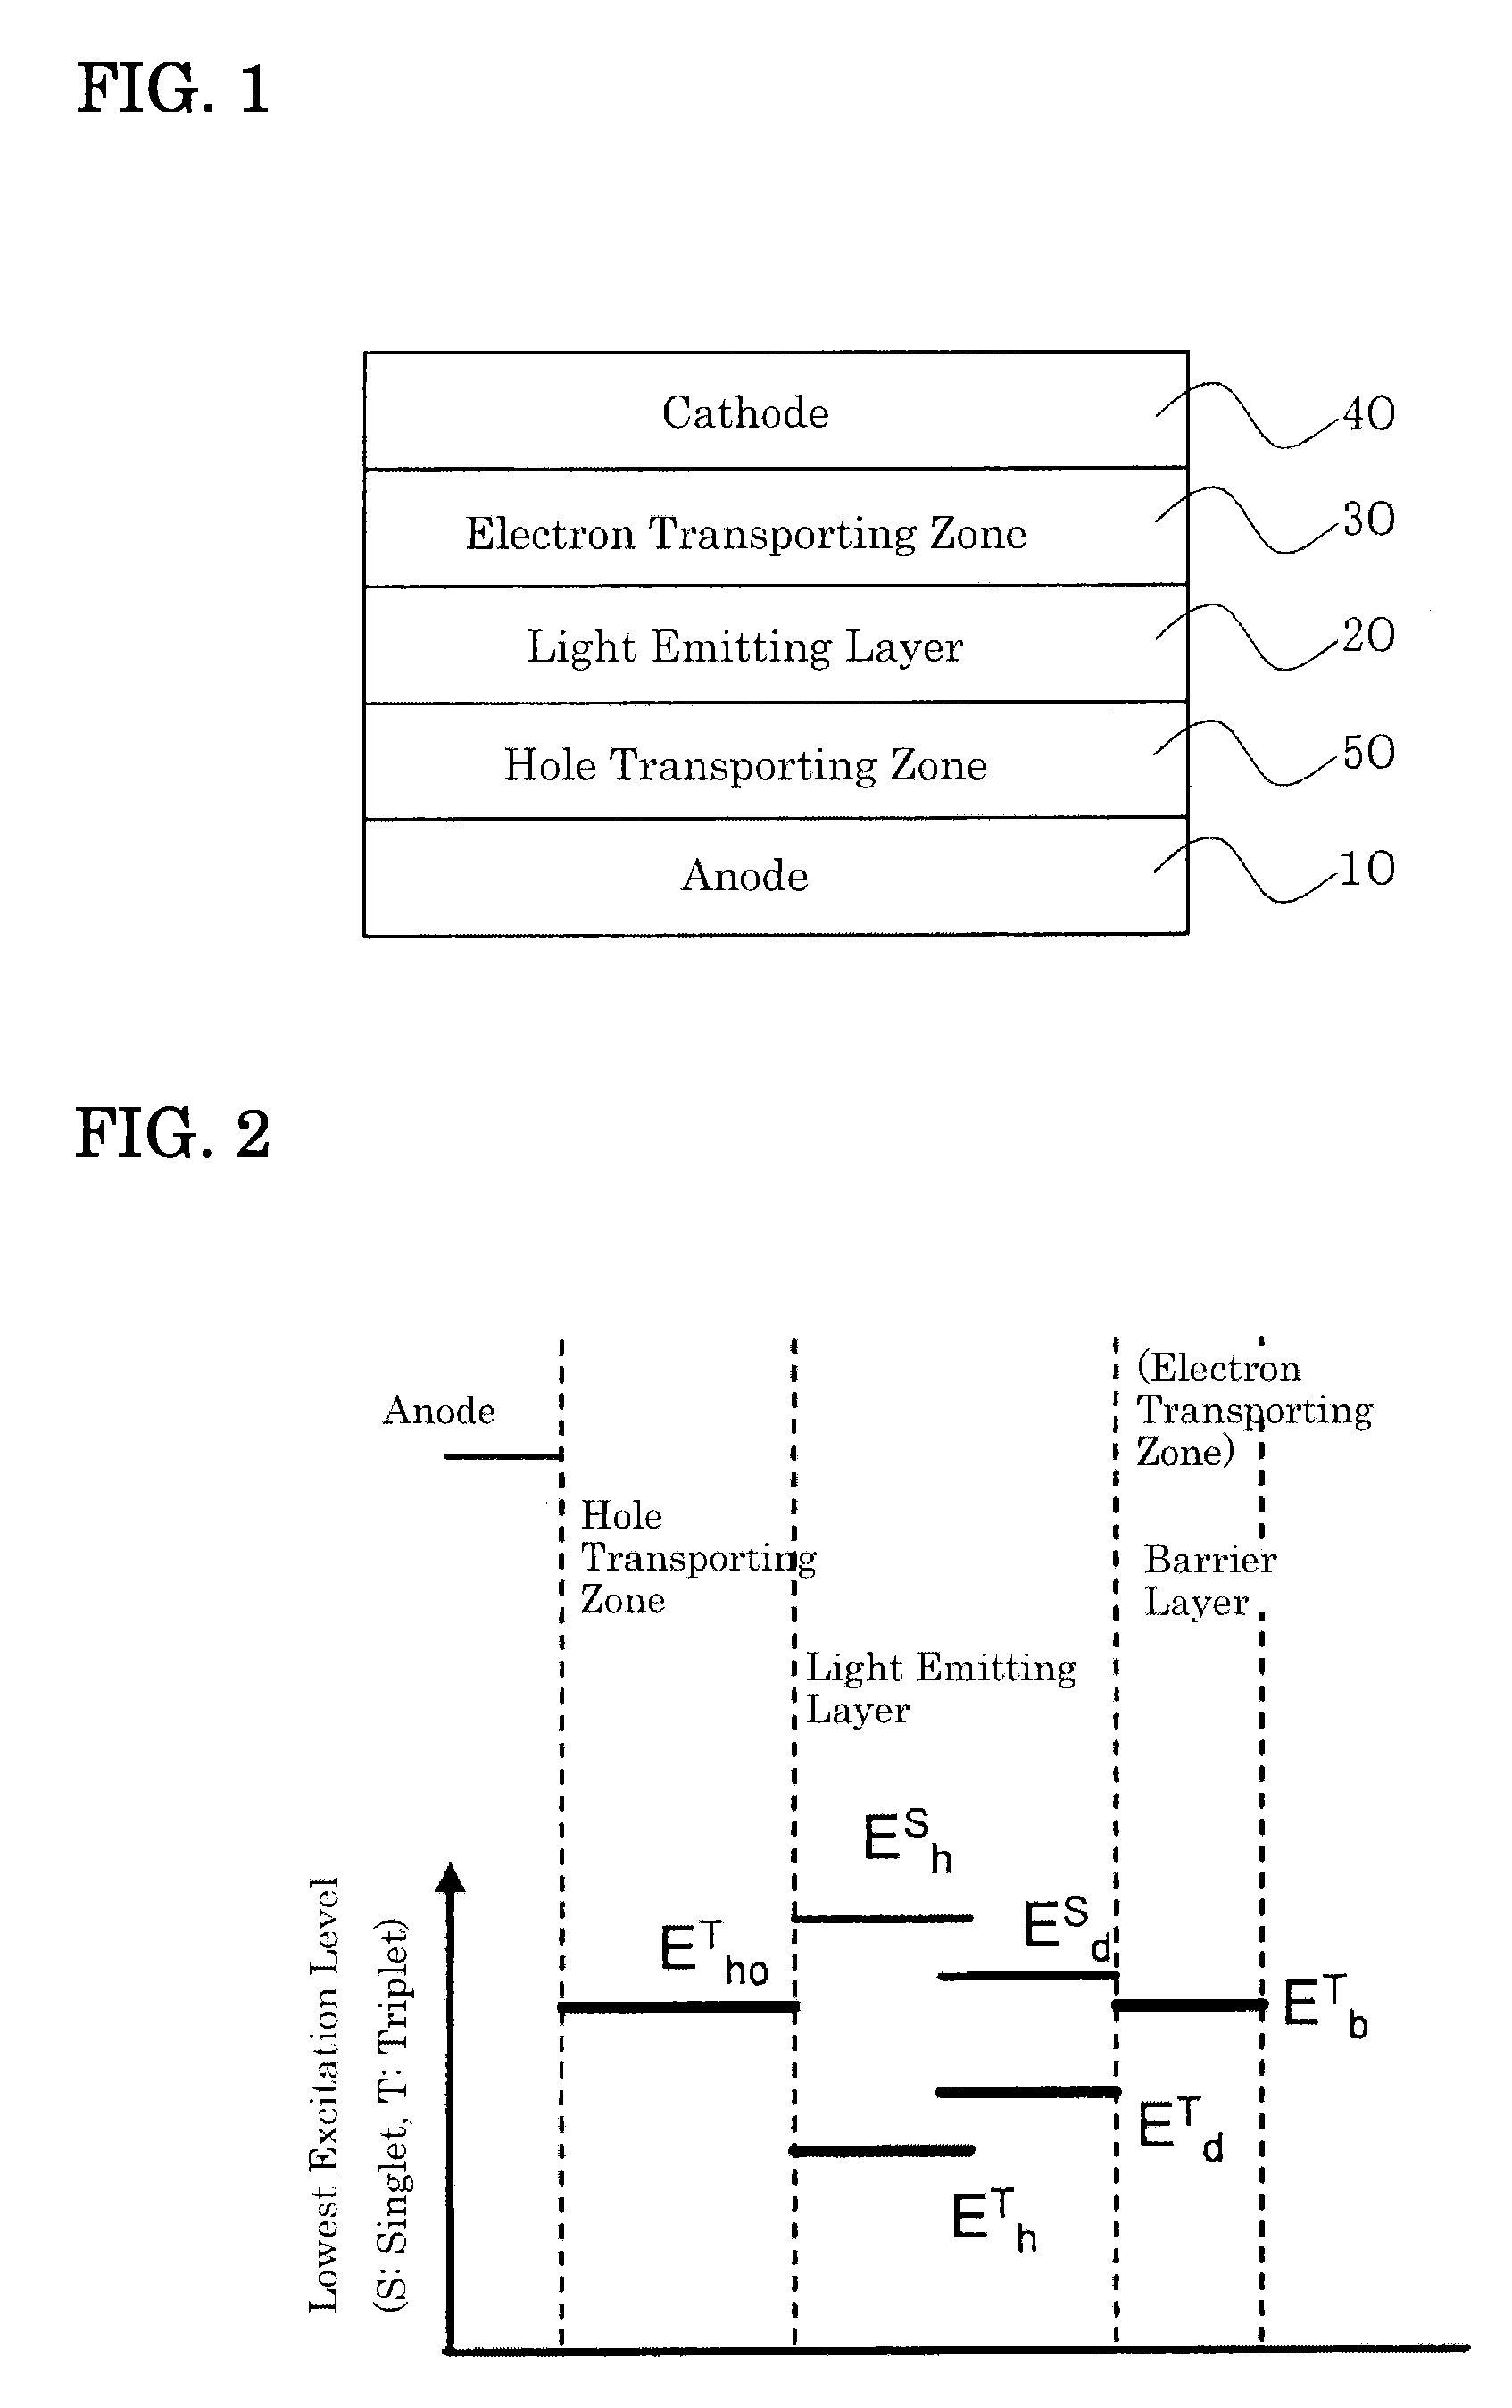 BENZO[k]FLUORANTHENE DERIVATIVE AND ORGANIC ELECTROLUMINESCENCE DEVICE CONTAINING THE SAME